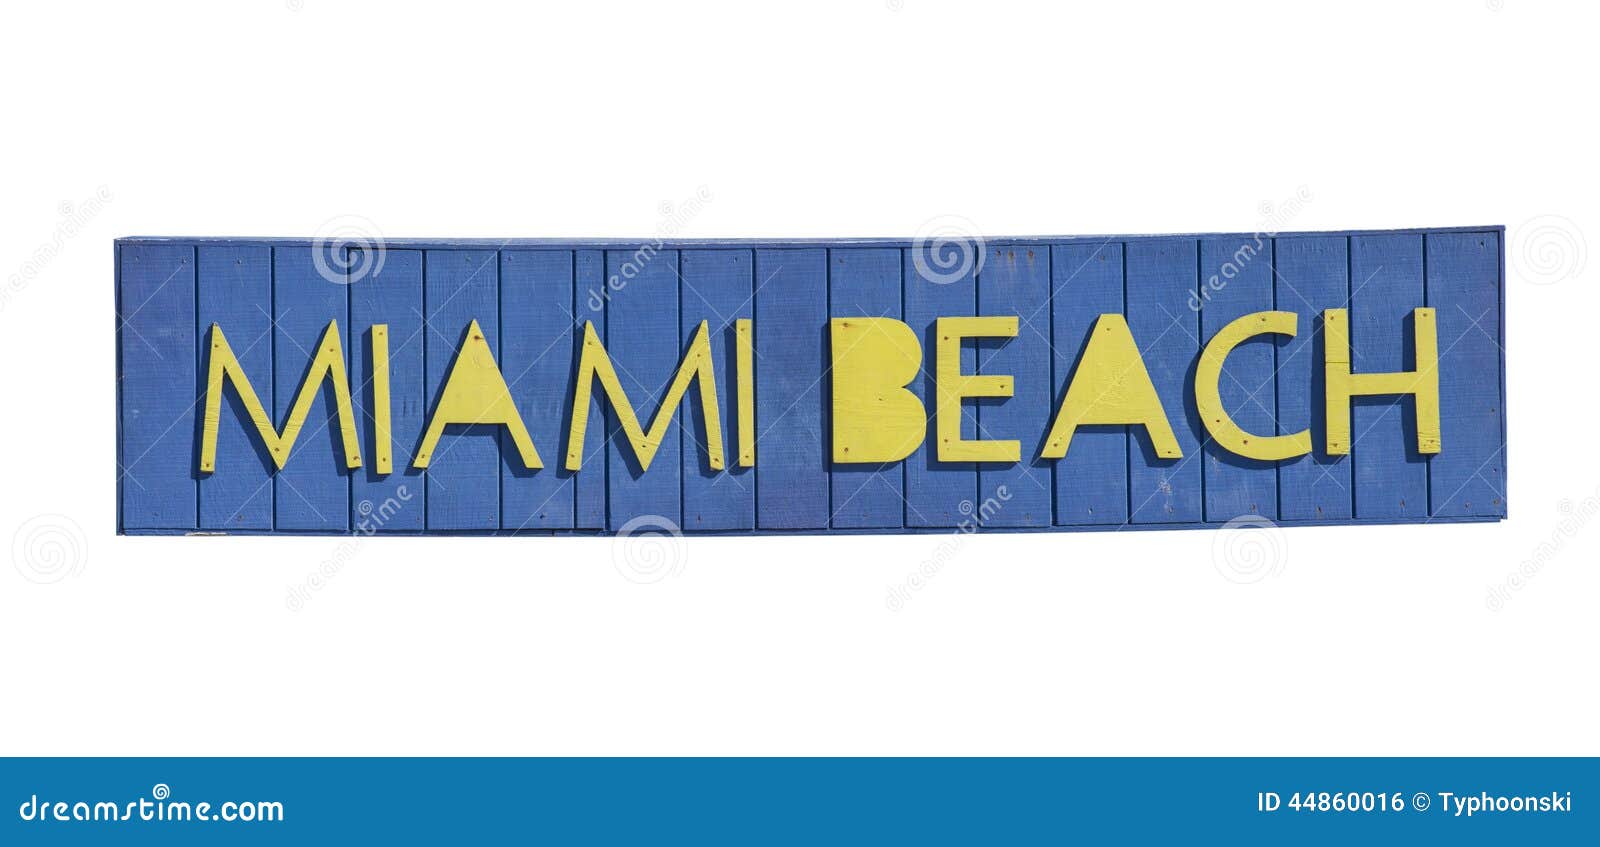 Miami Beach writing on wooden background isolated over white